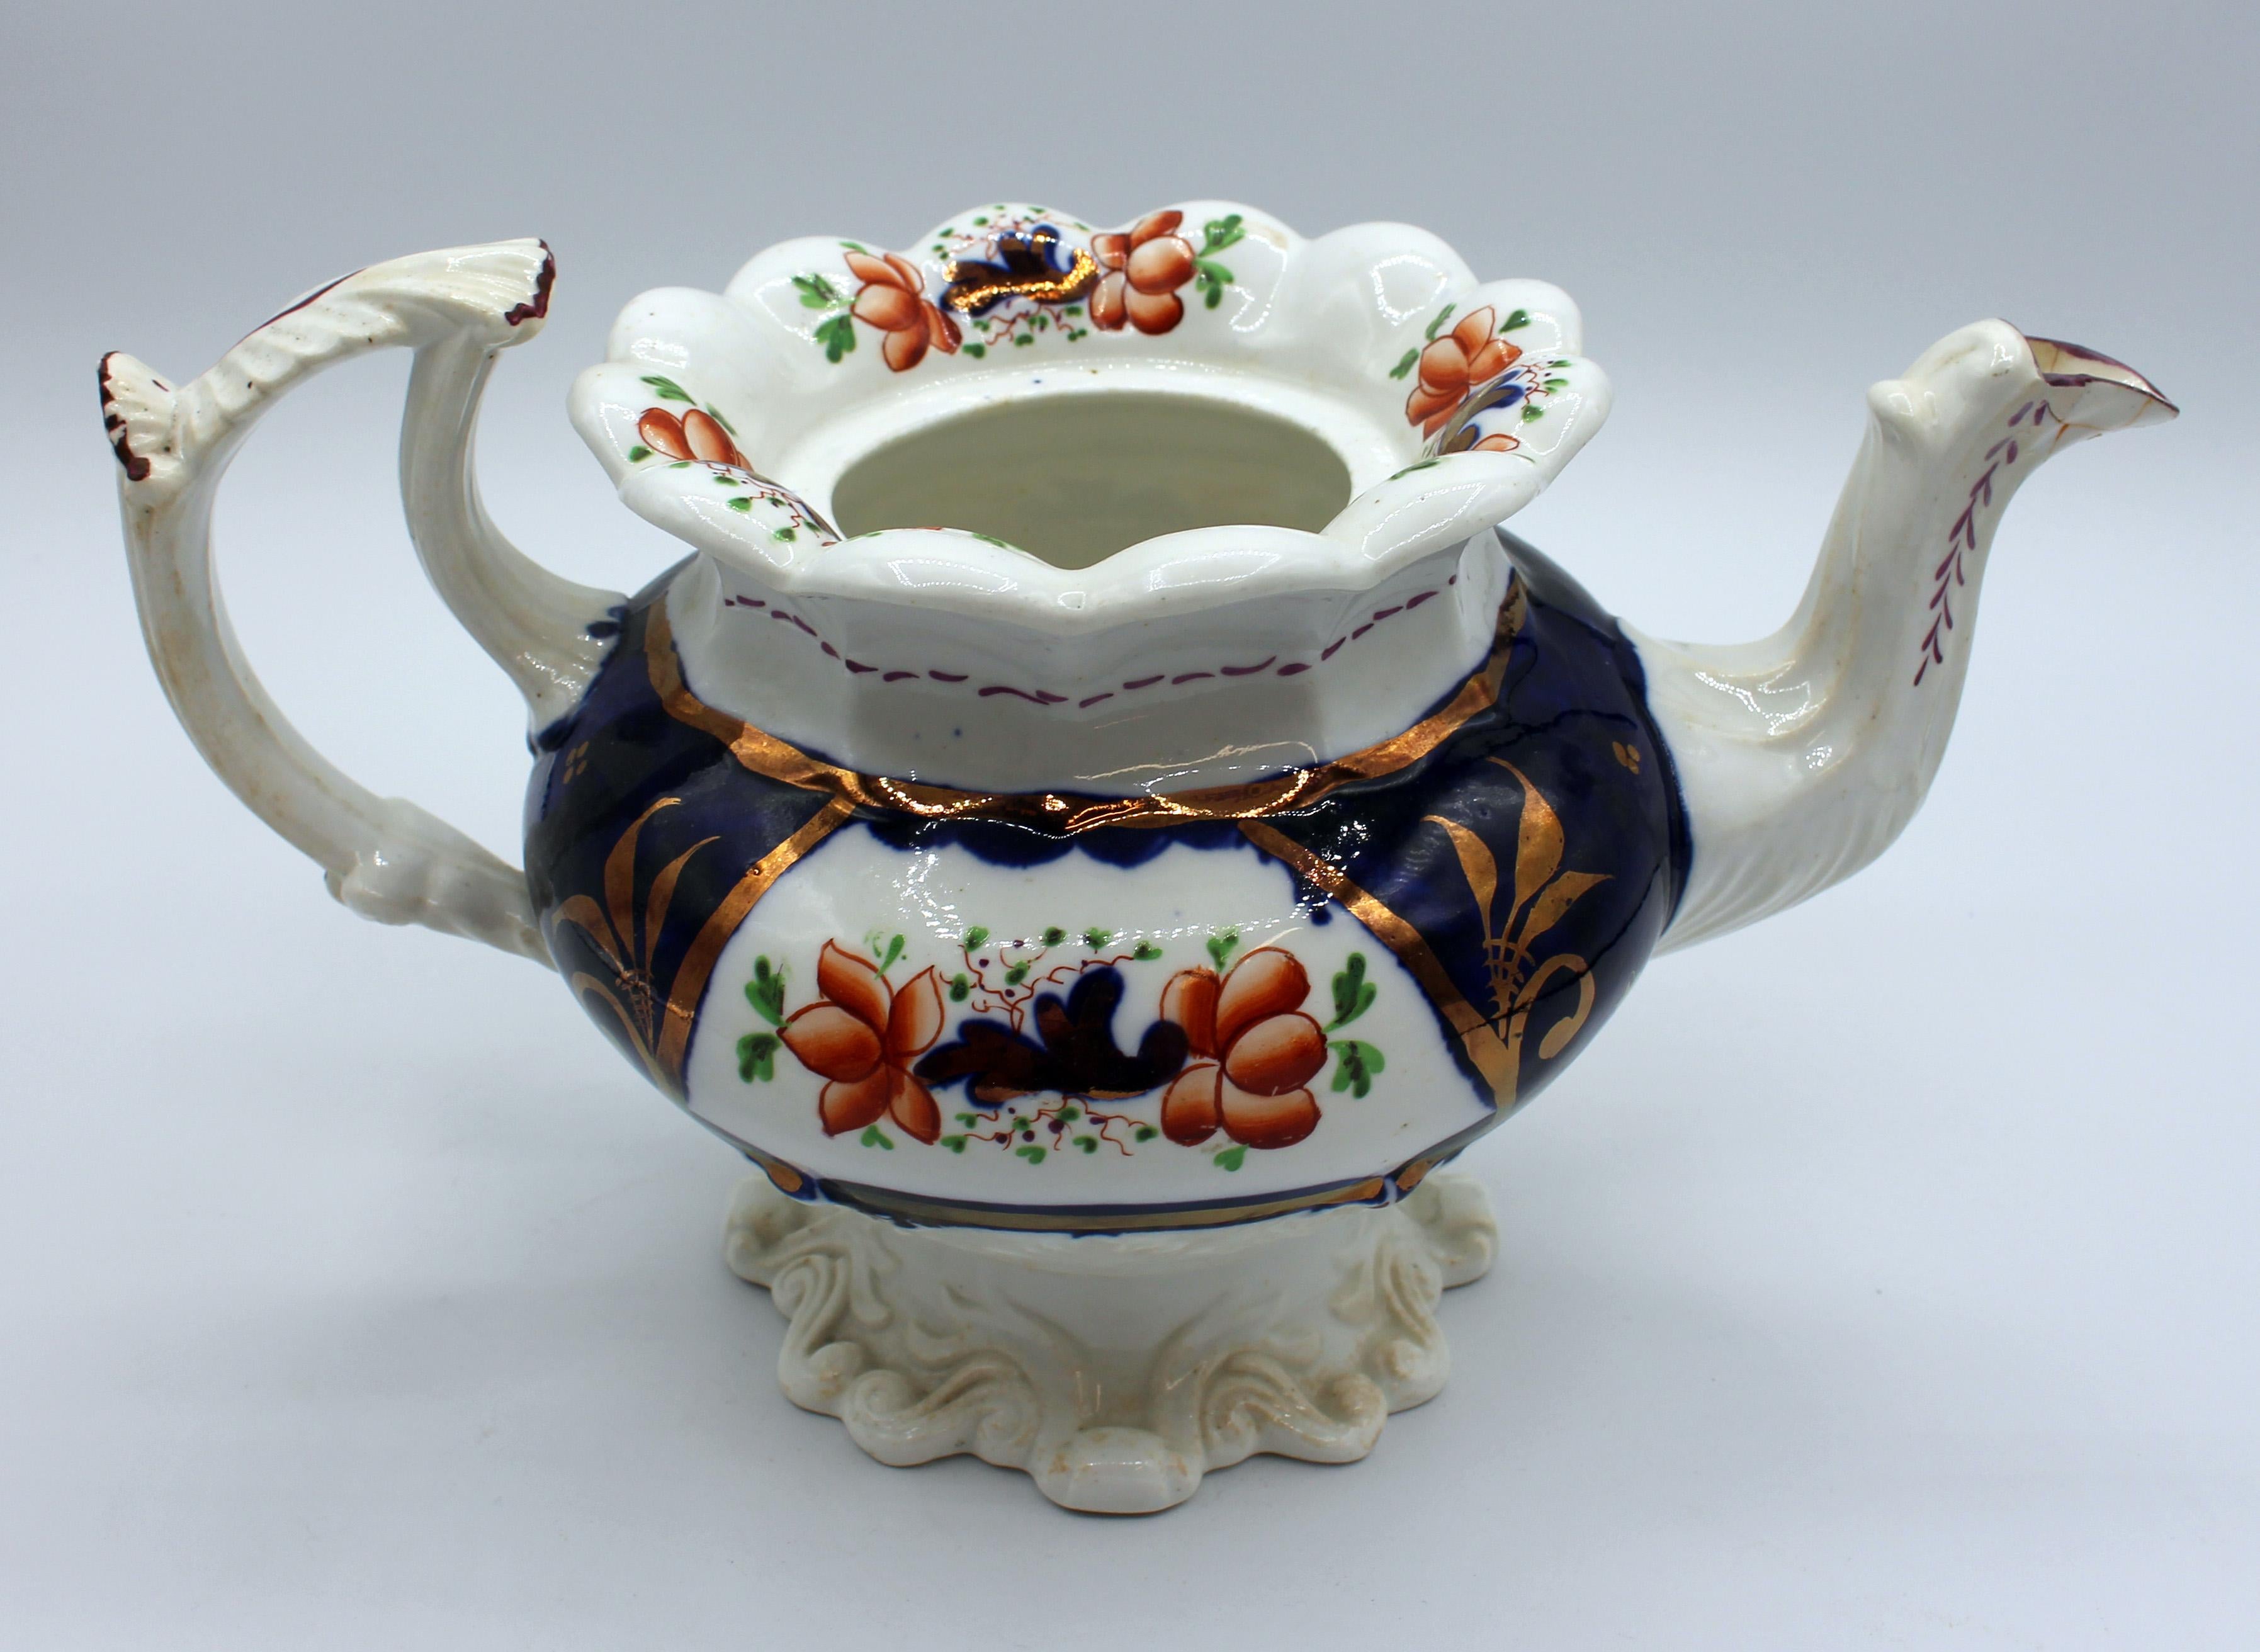 Mid-19th Century Gaudy Welsh tea set - pot, cream & covered sugar. English porcelain, Staffordshire district. Molded bodies with lush scrolling leaves. Old spout repair; light staining; tiny base nibble on creamer. Measures: Pot: 11